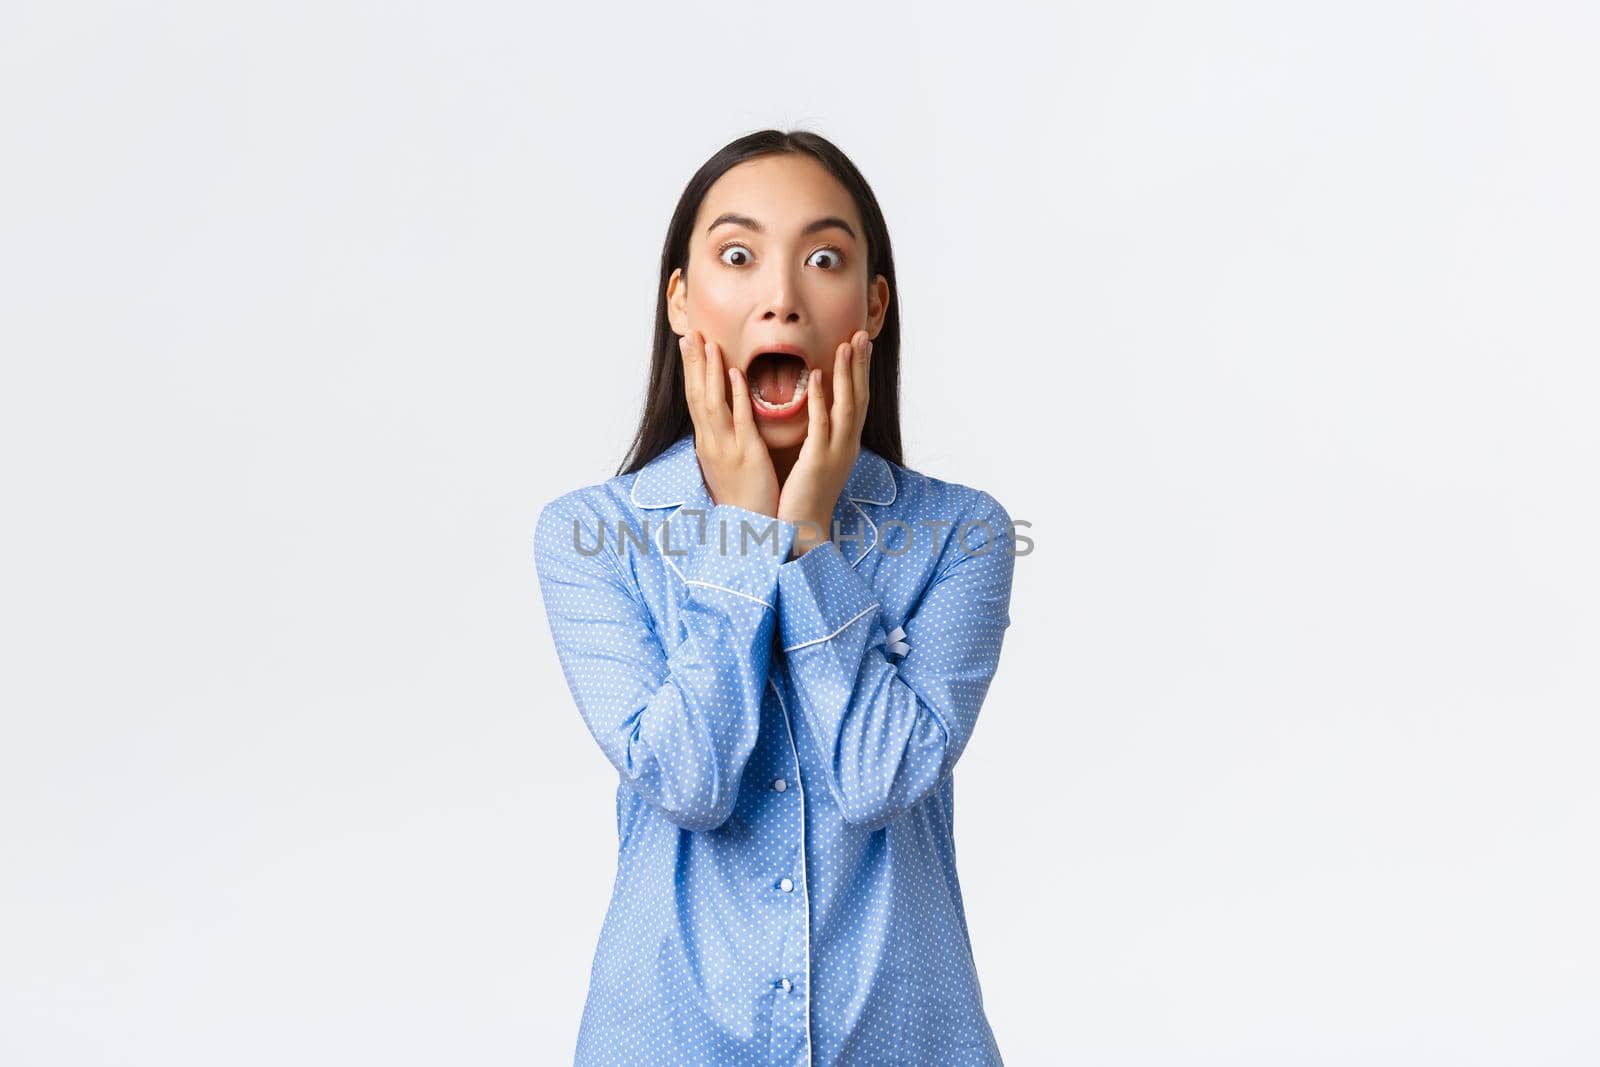 Surprised and shocked asian girl in blue pajamas screaming in awe and amazement, holding hands over opened mouth and stare at camera impressed, standing white background.